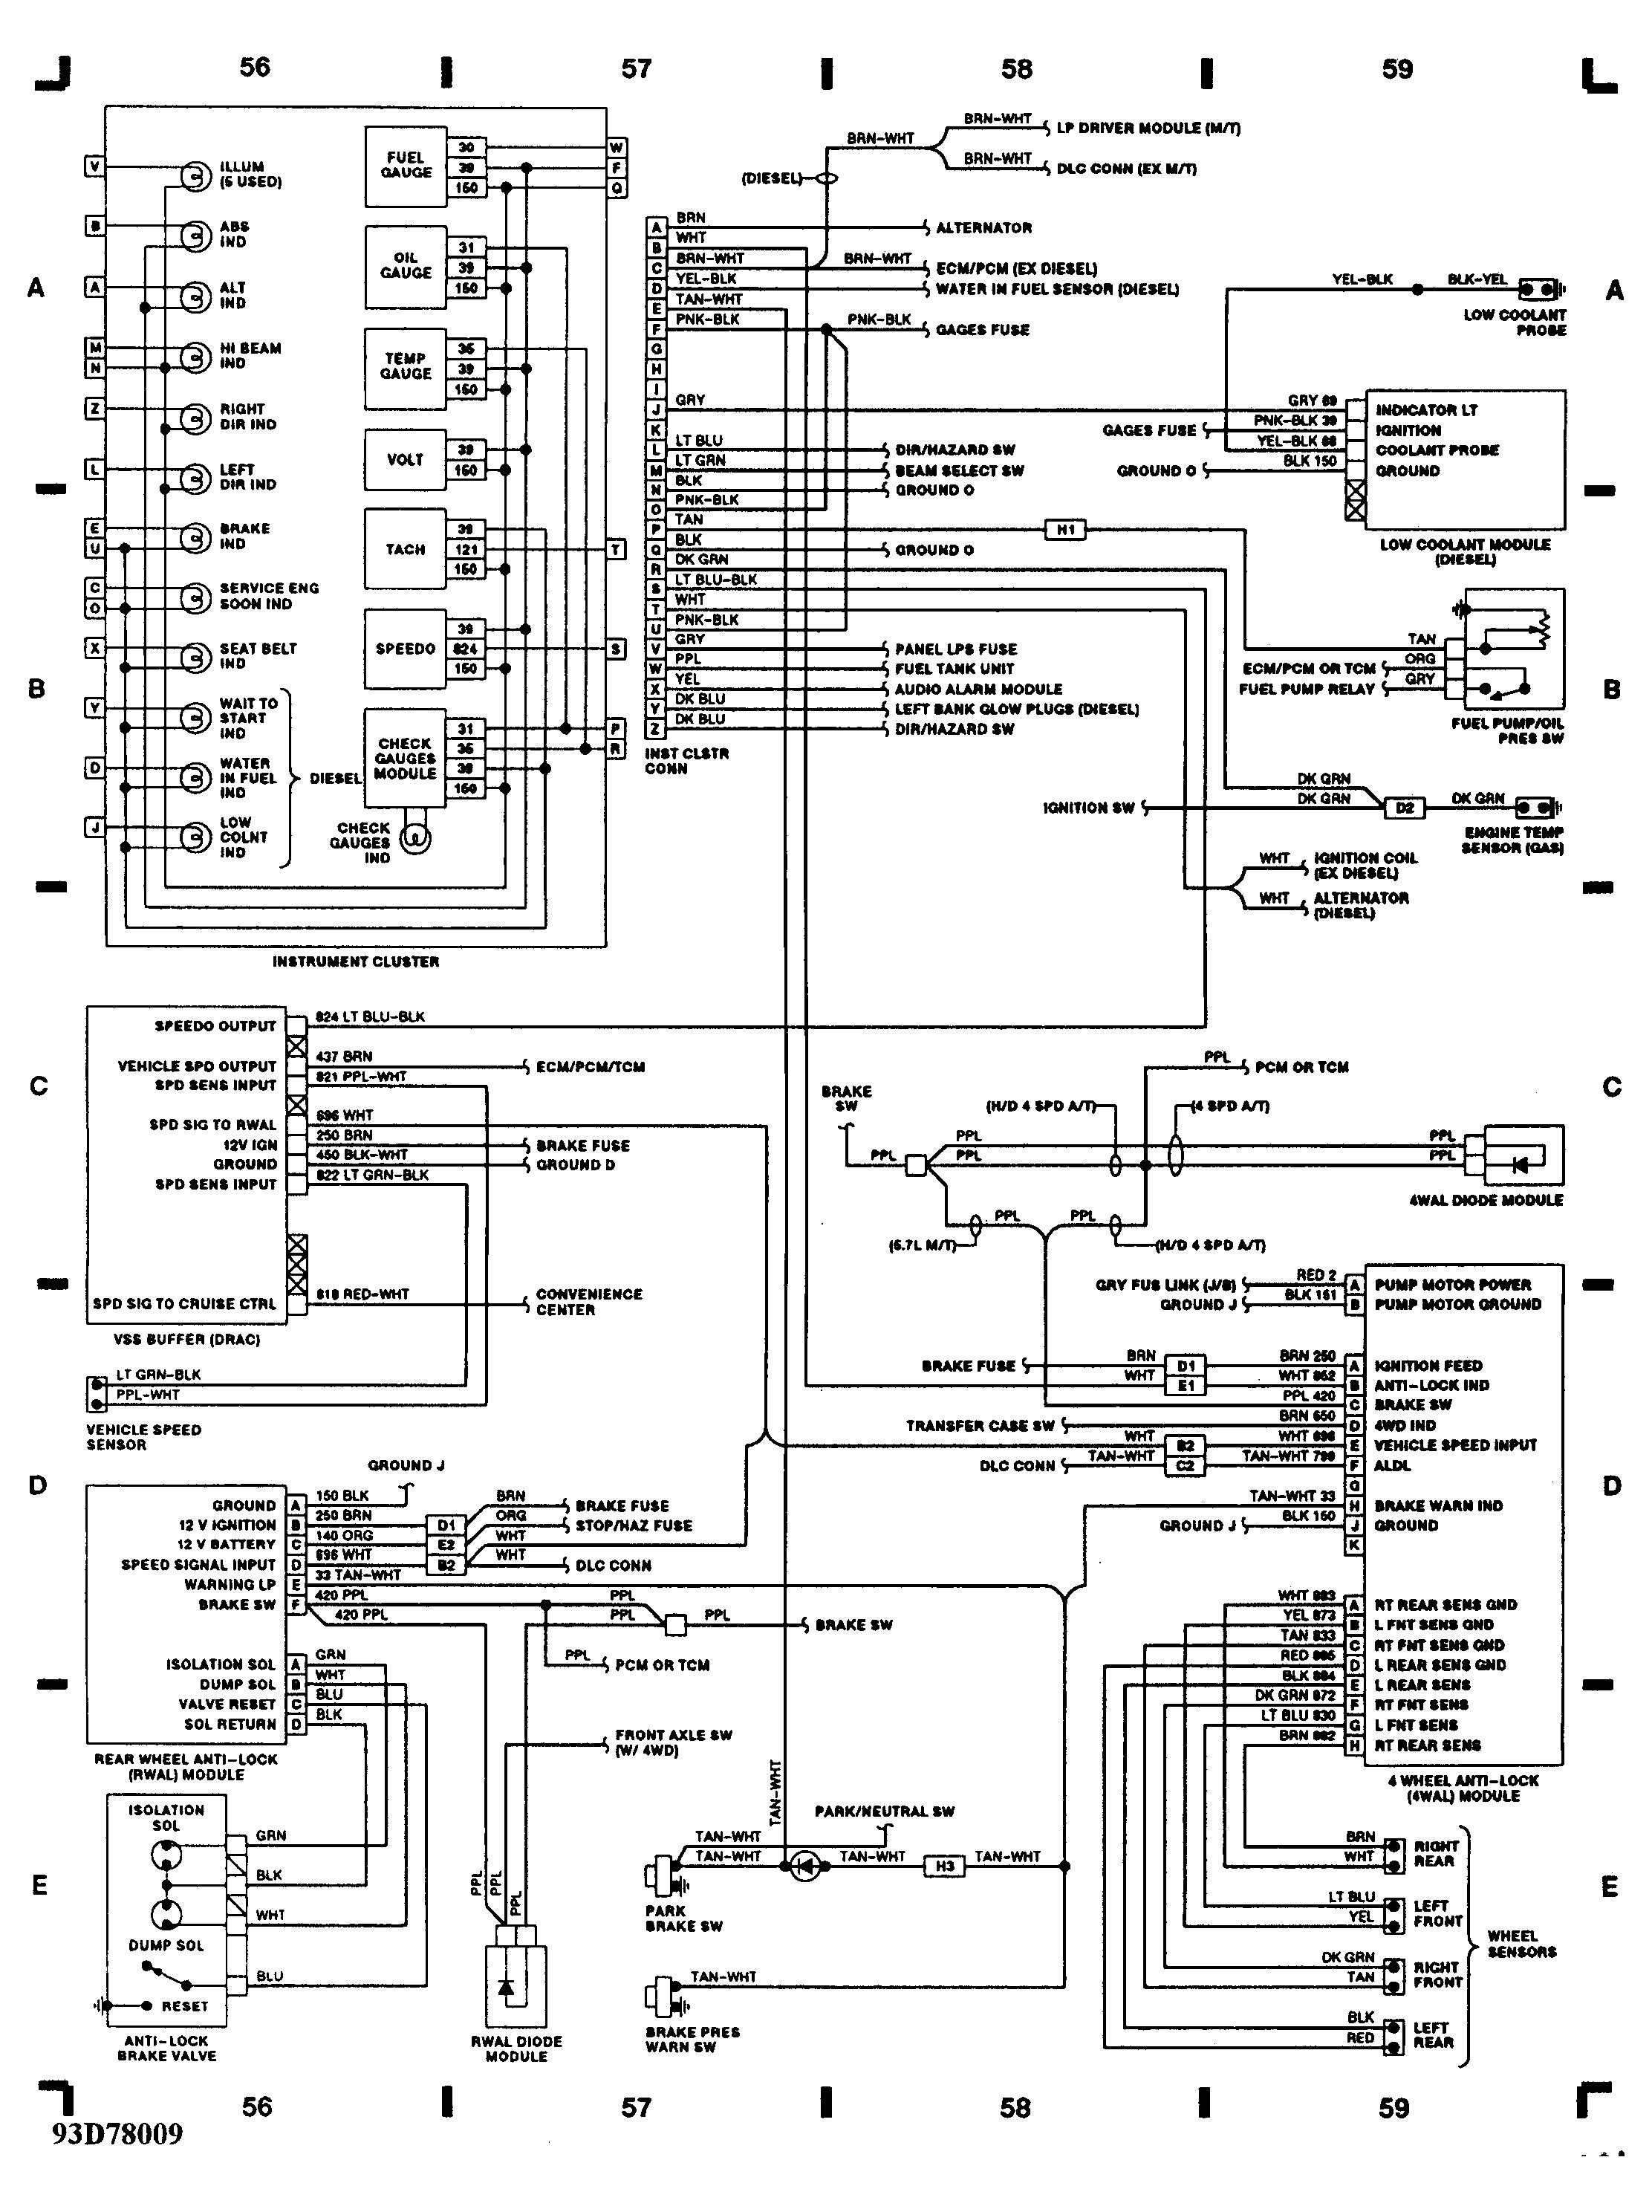 1993 Chevy Silverado Wiring Diagram Beautiful I Have A 93 Silverado with Od Automatic Transmission and 5 7 L